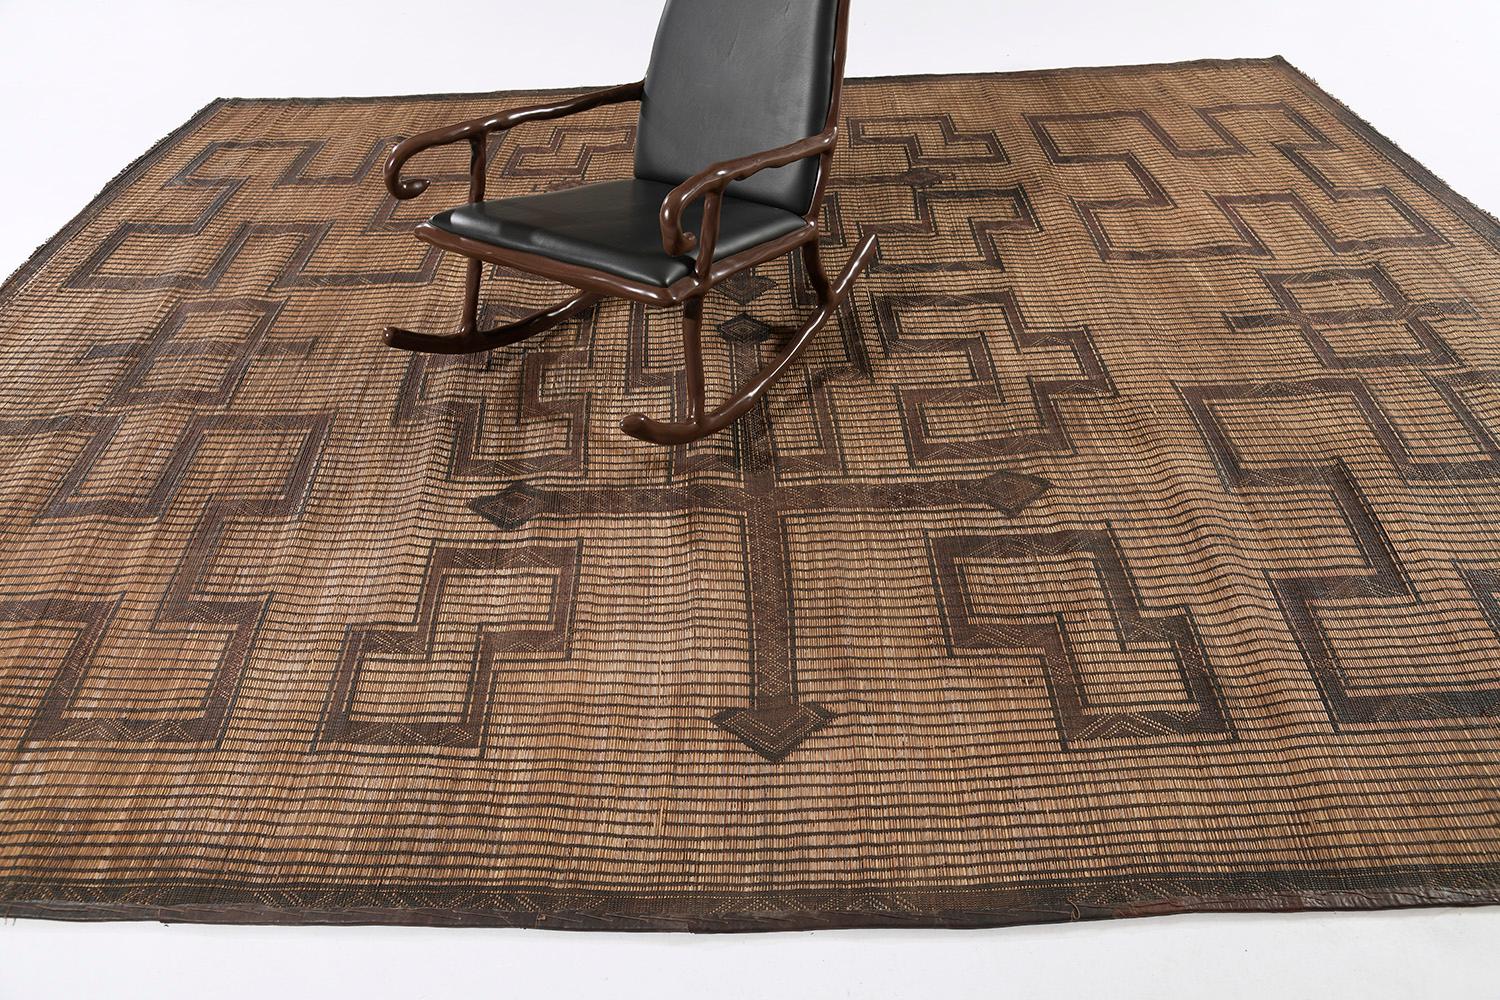 This exceptional and one-of-a-kind rug from the African Tuareg tribe features all the Berber symbols. Its natural color schemes of brown and gold were added to the uniqueness of this masterpiece. Ethnic modern interiors are most likely to be the